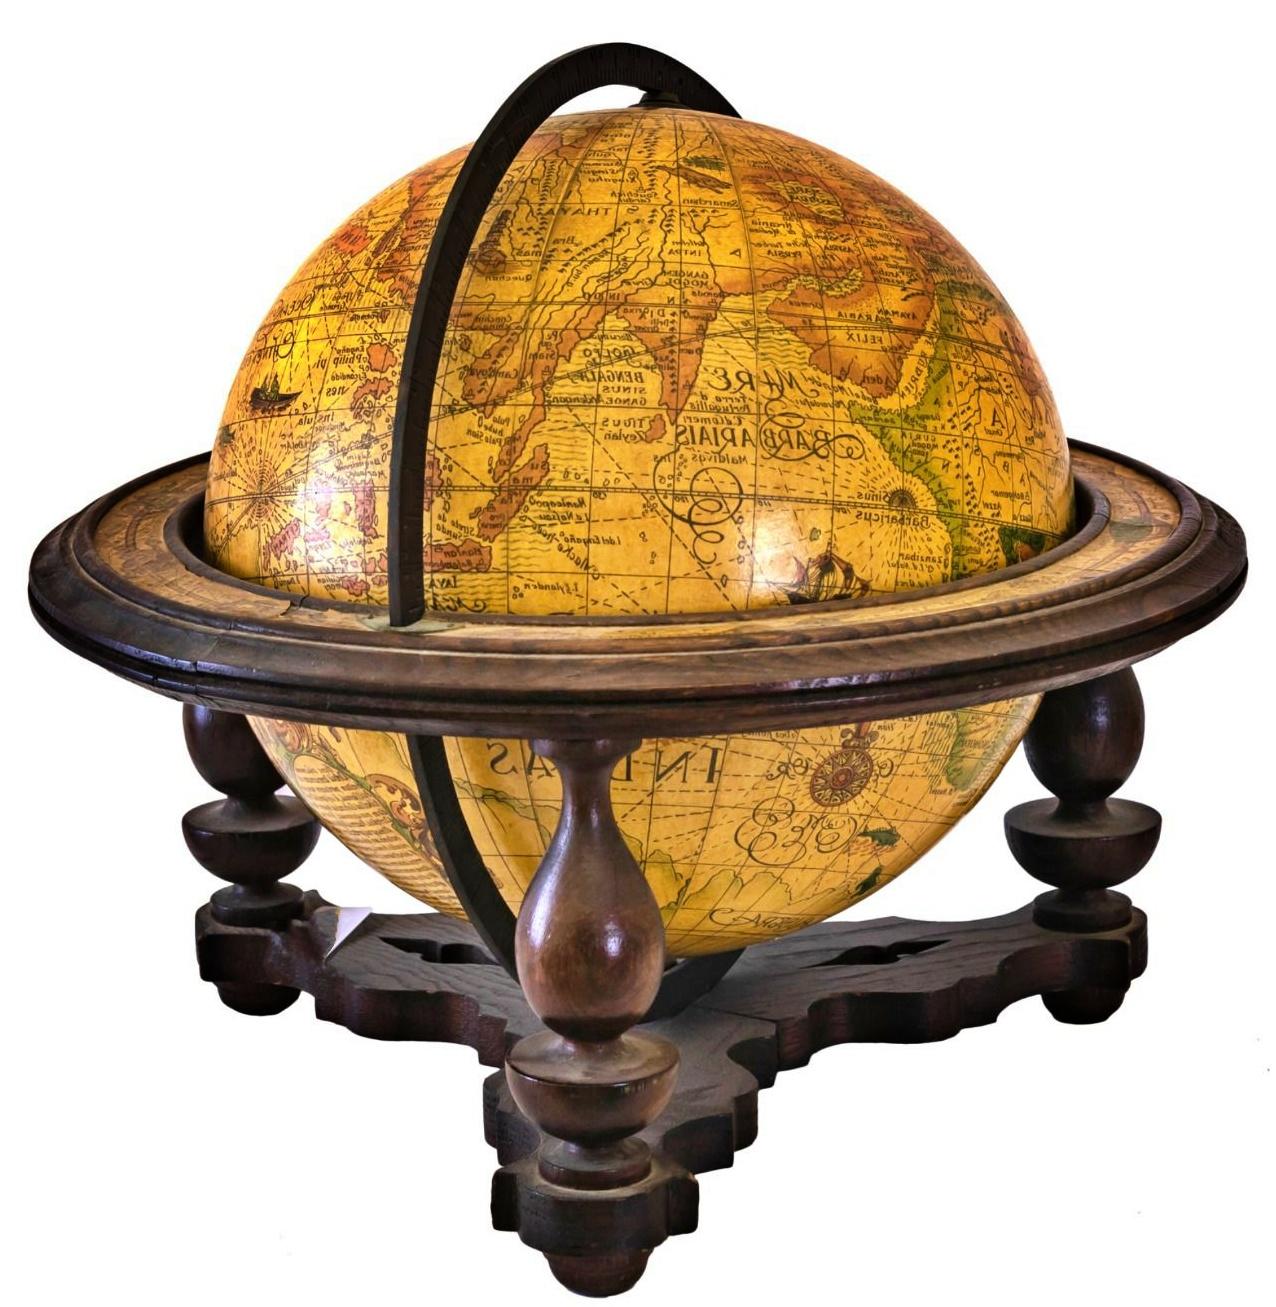 Spanish Tabletop globe with turned wood support.
Early 20th Century
Measurements: 32 x 35 cm
Good condition